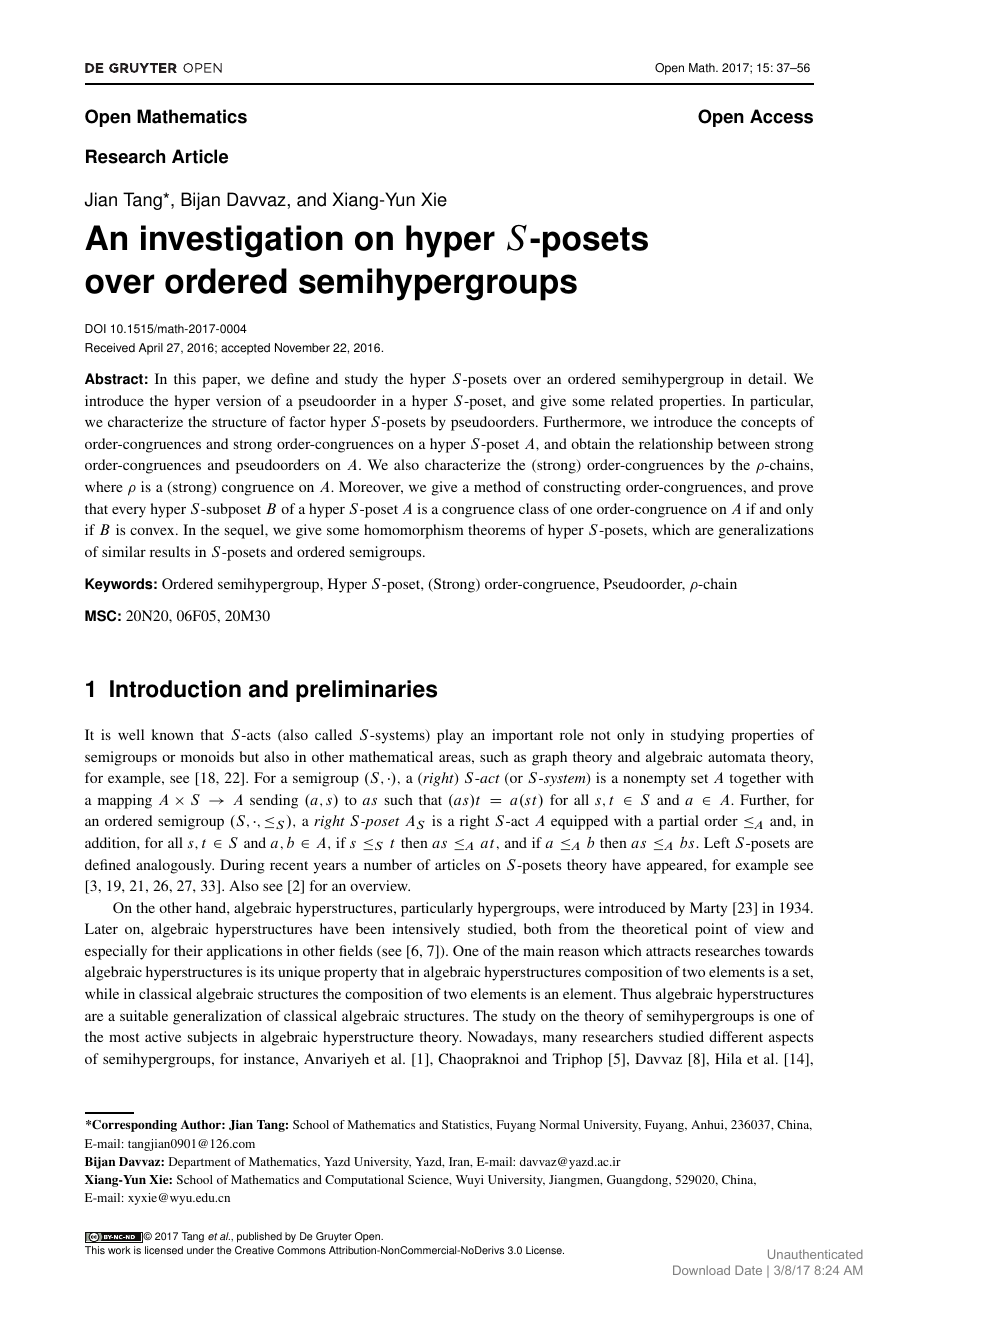 An Investigation On Hyper S Posets Over Ordered Semihypergroups Topic Of Research Paper In Mathematics Download Scholarly Article Pdf And Read For Free On Cyberleninka Open Science Hub